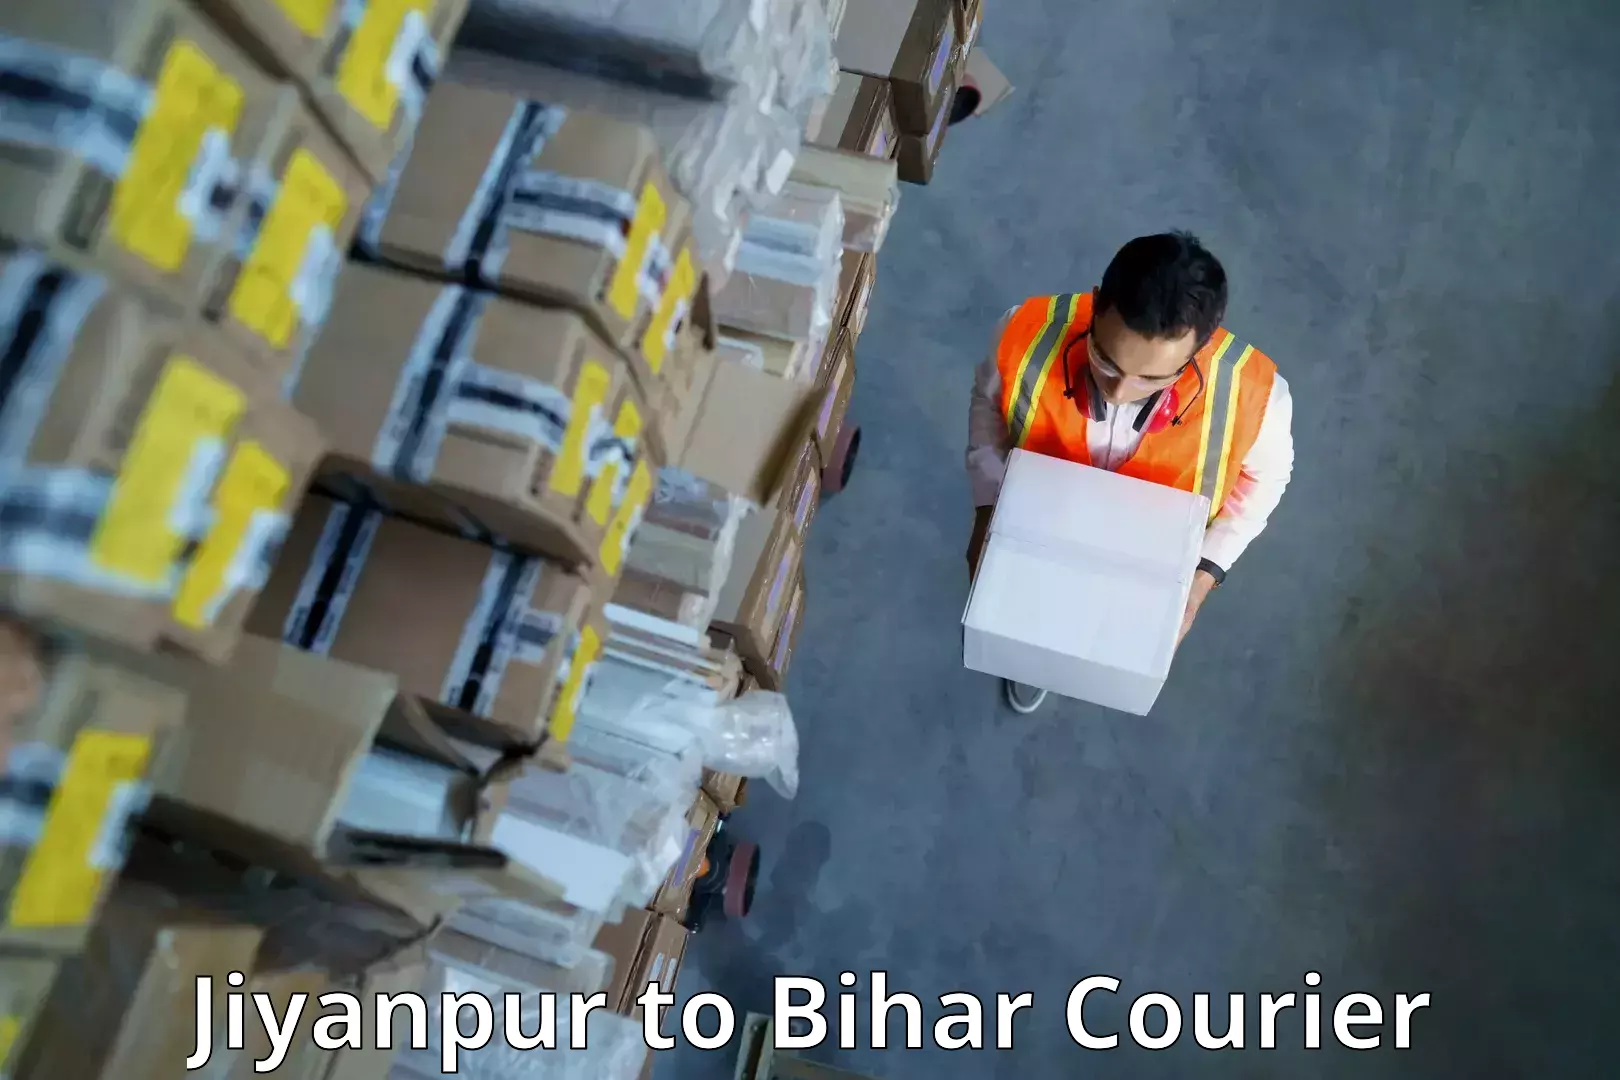 State-of-the-art courier technology Jiyanpur to Bagaha